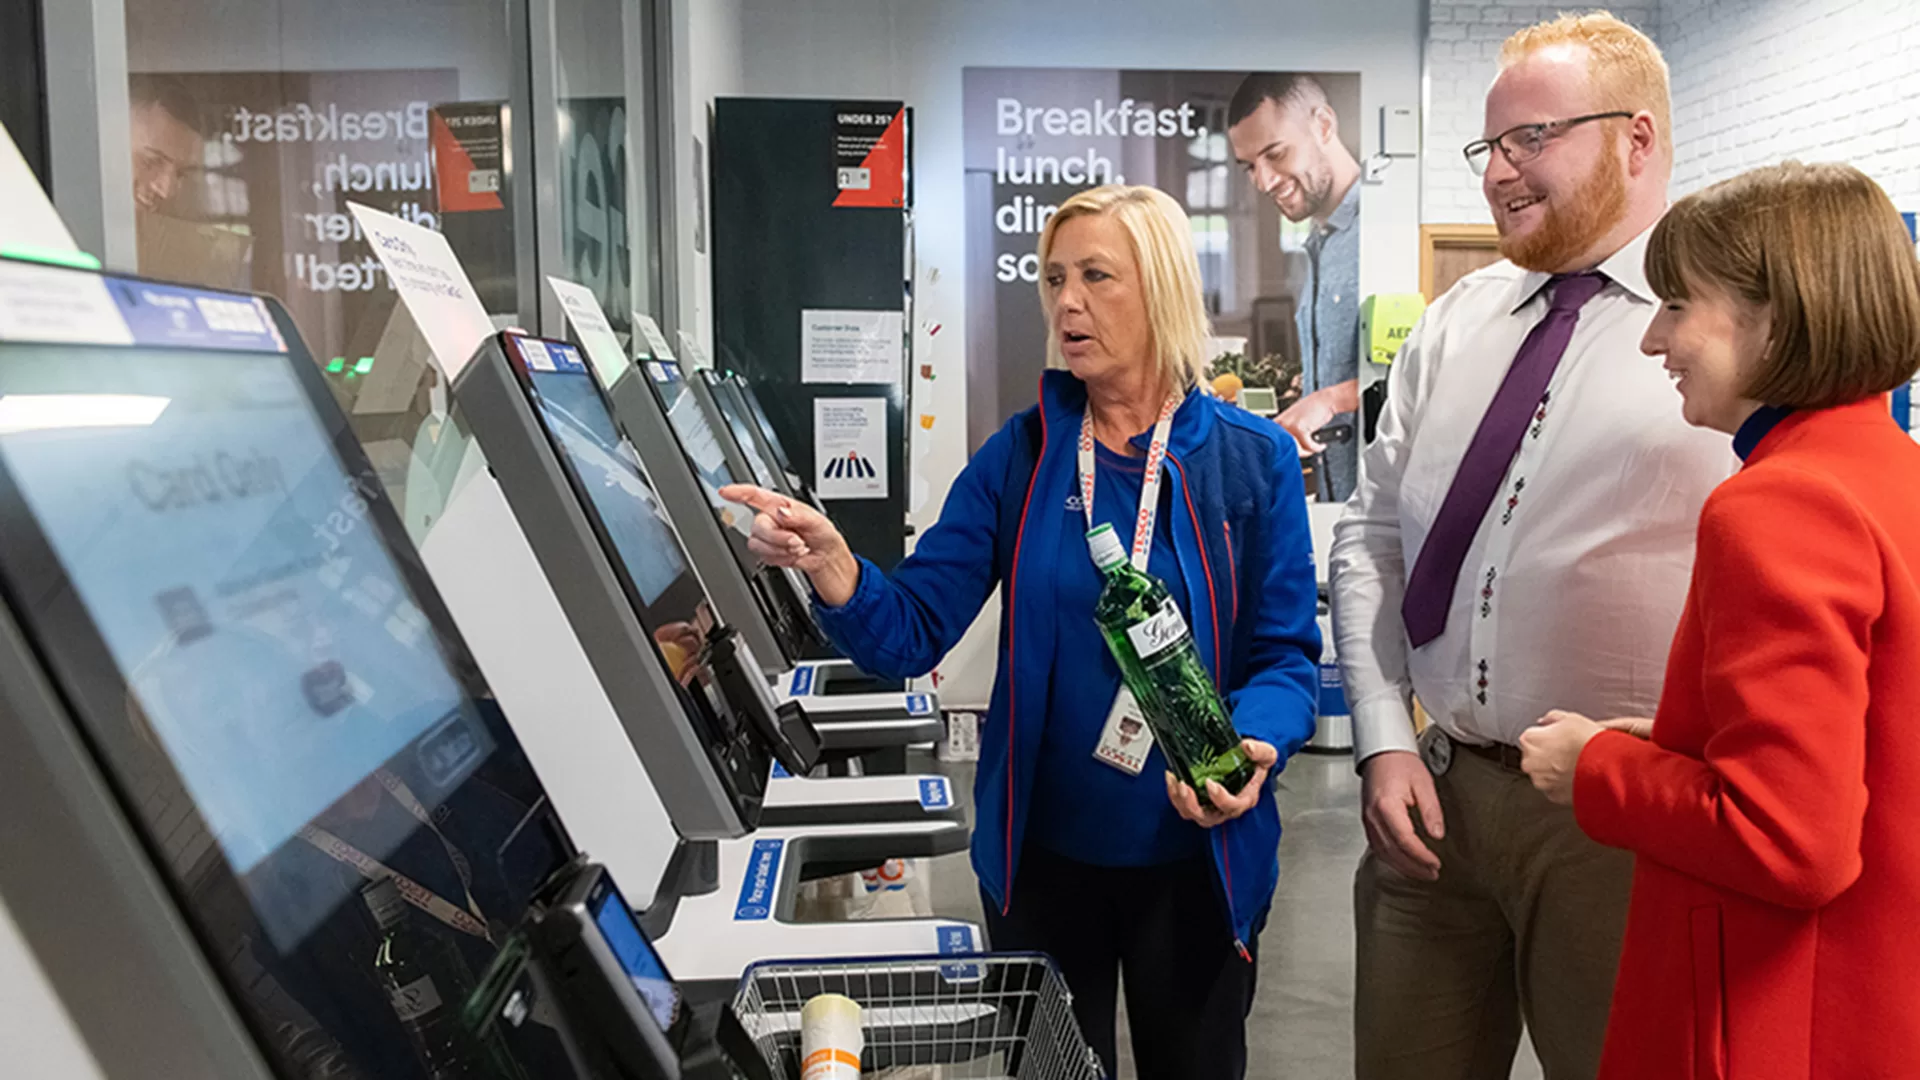 Tesco sales assistant helping two people with a self service till